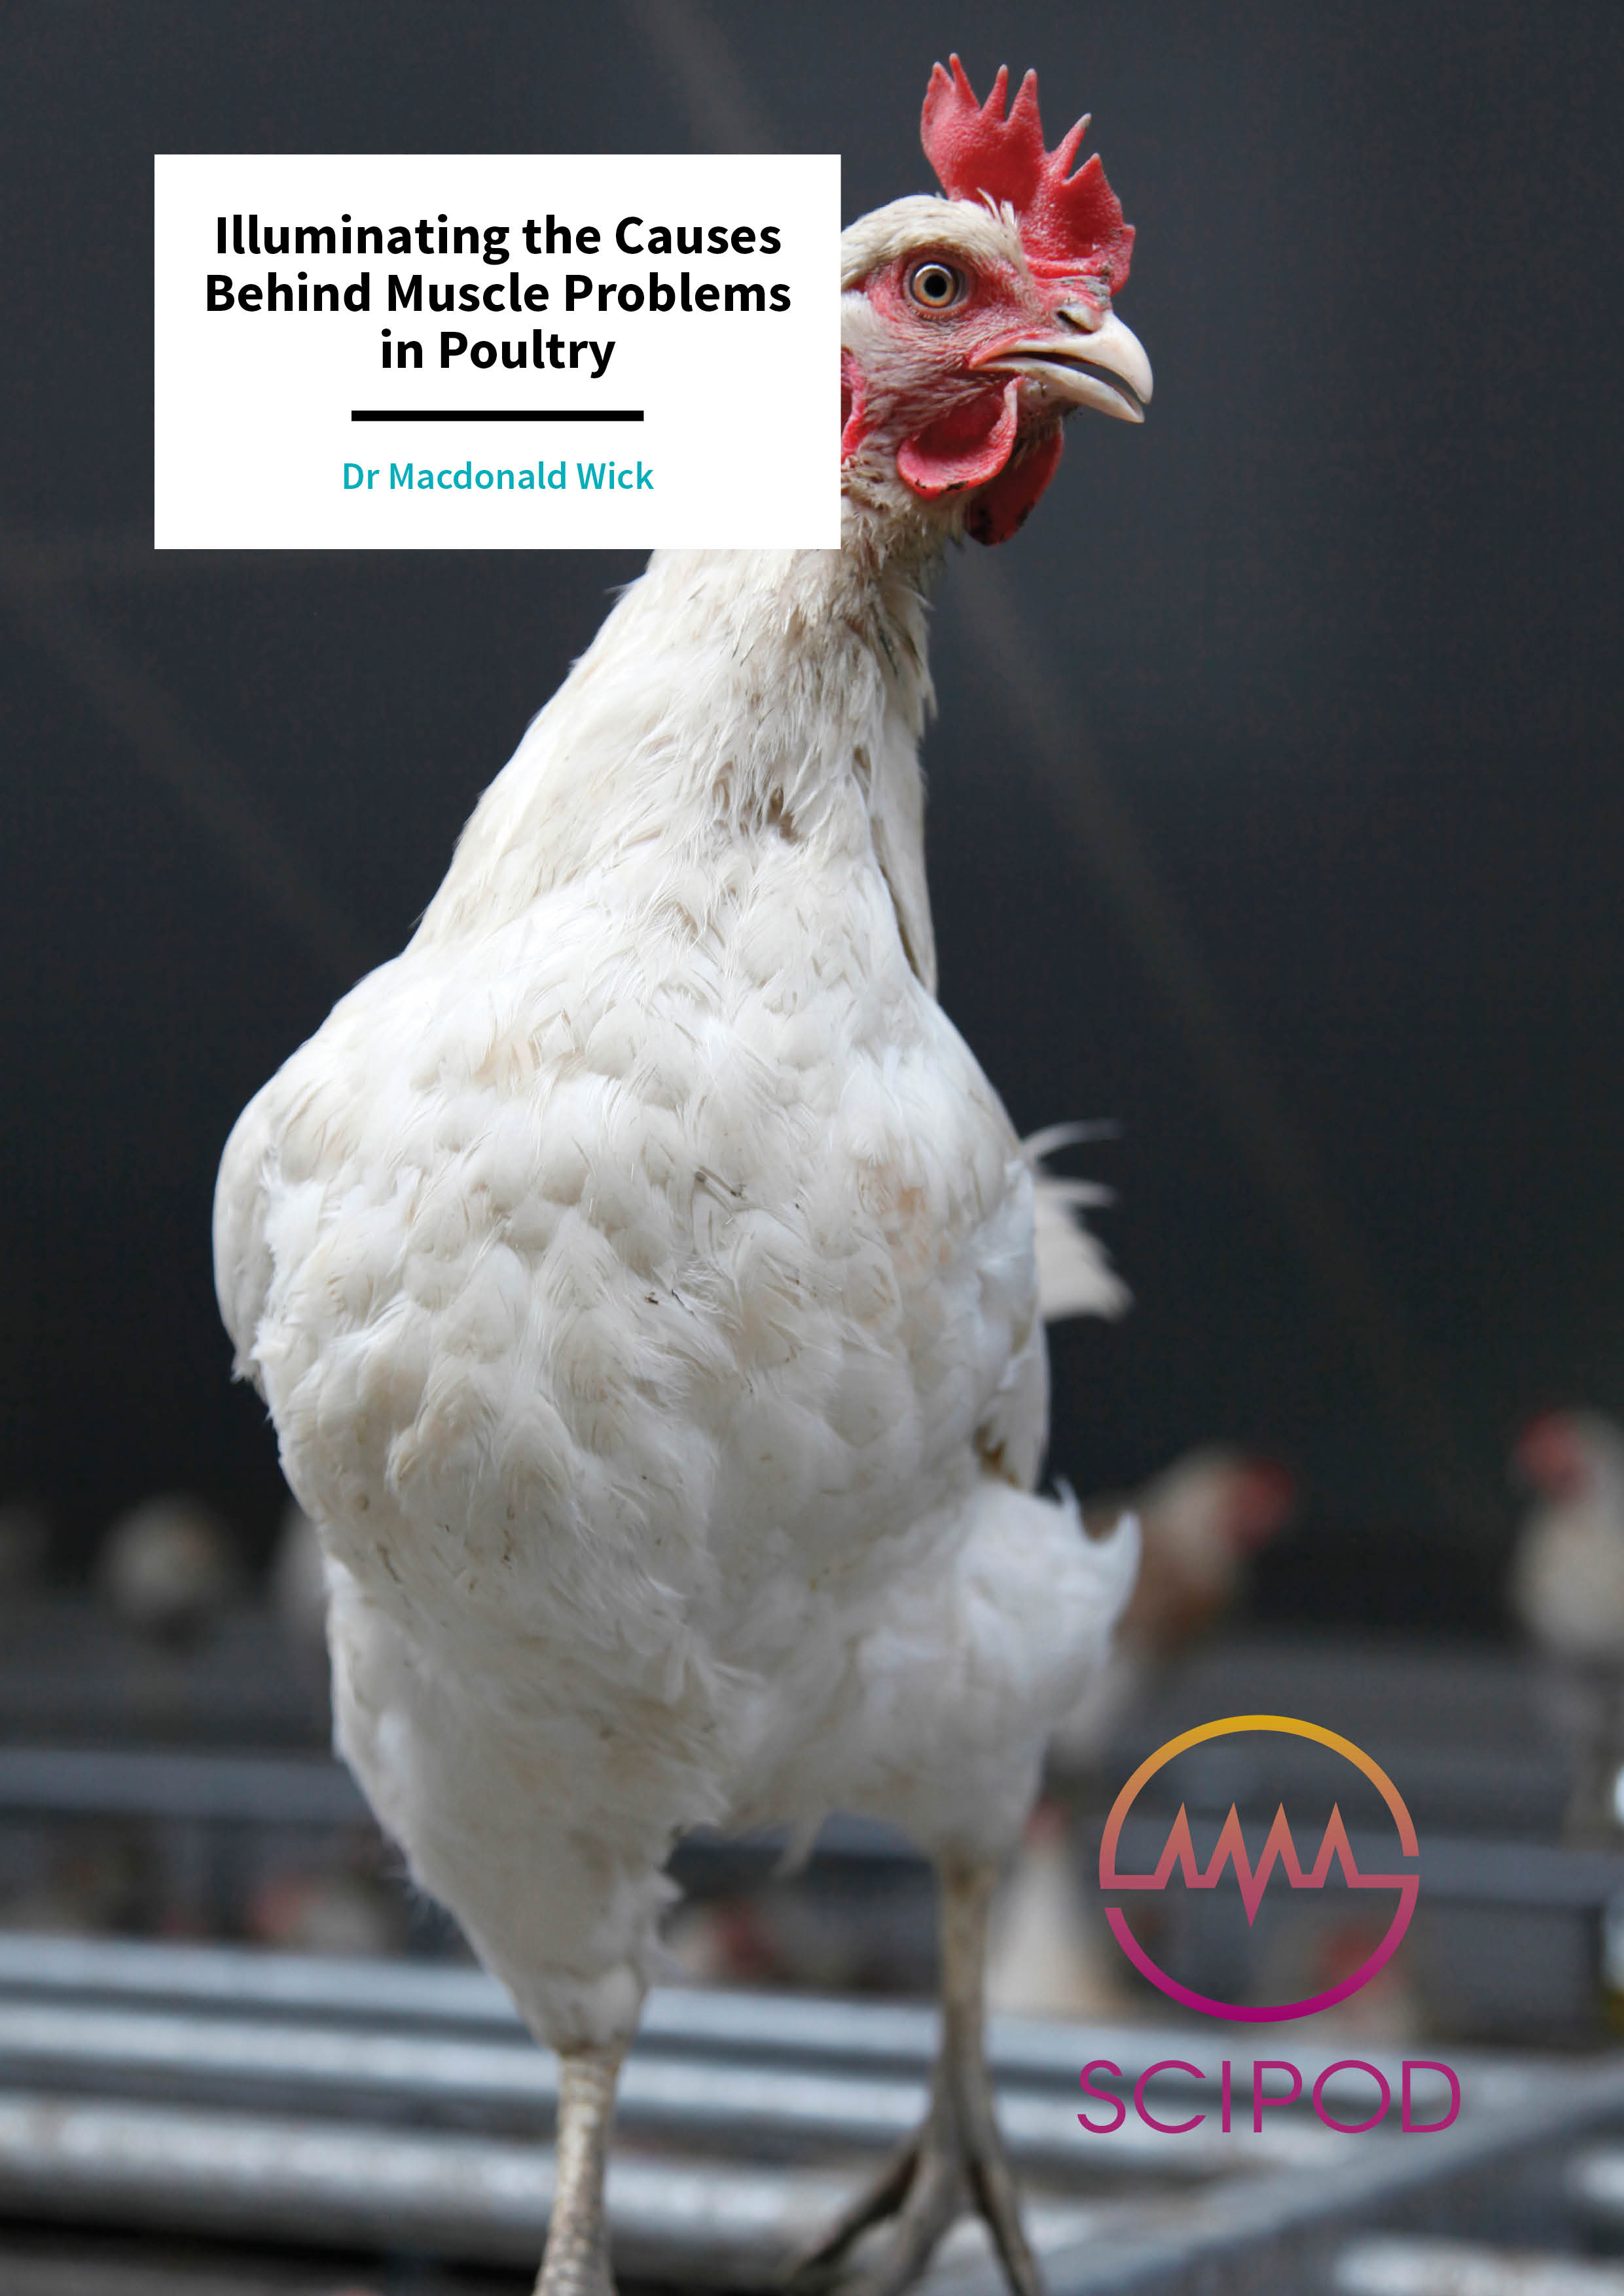 Illuminating the Causes Behind Muscle Problems in Poultry – Dr Macdonald Wick, The Ohio State University